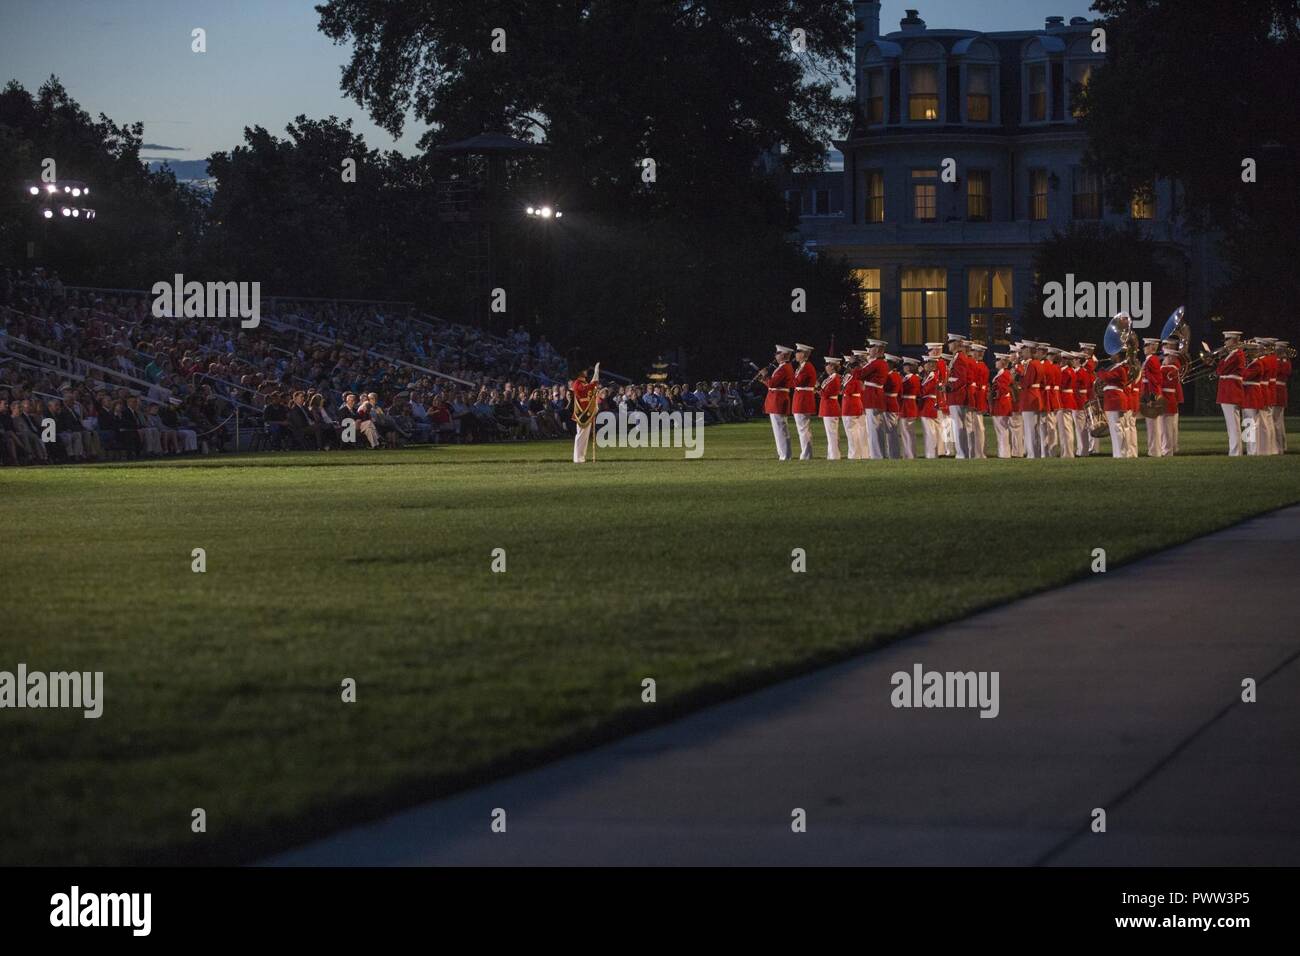 U.S. Marines with 'The Presidents Own' United States Marine Band perform during an evening parade at Marine Barracks Washington, Washington, D.C., June 23, 2017. Evening parades are held as a means of honoring senior officials, distinguished citizens and supporters of the Marine Corps. Stock Photo